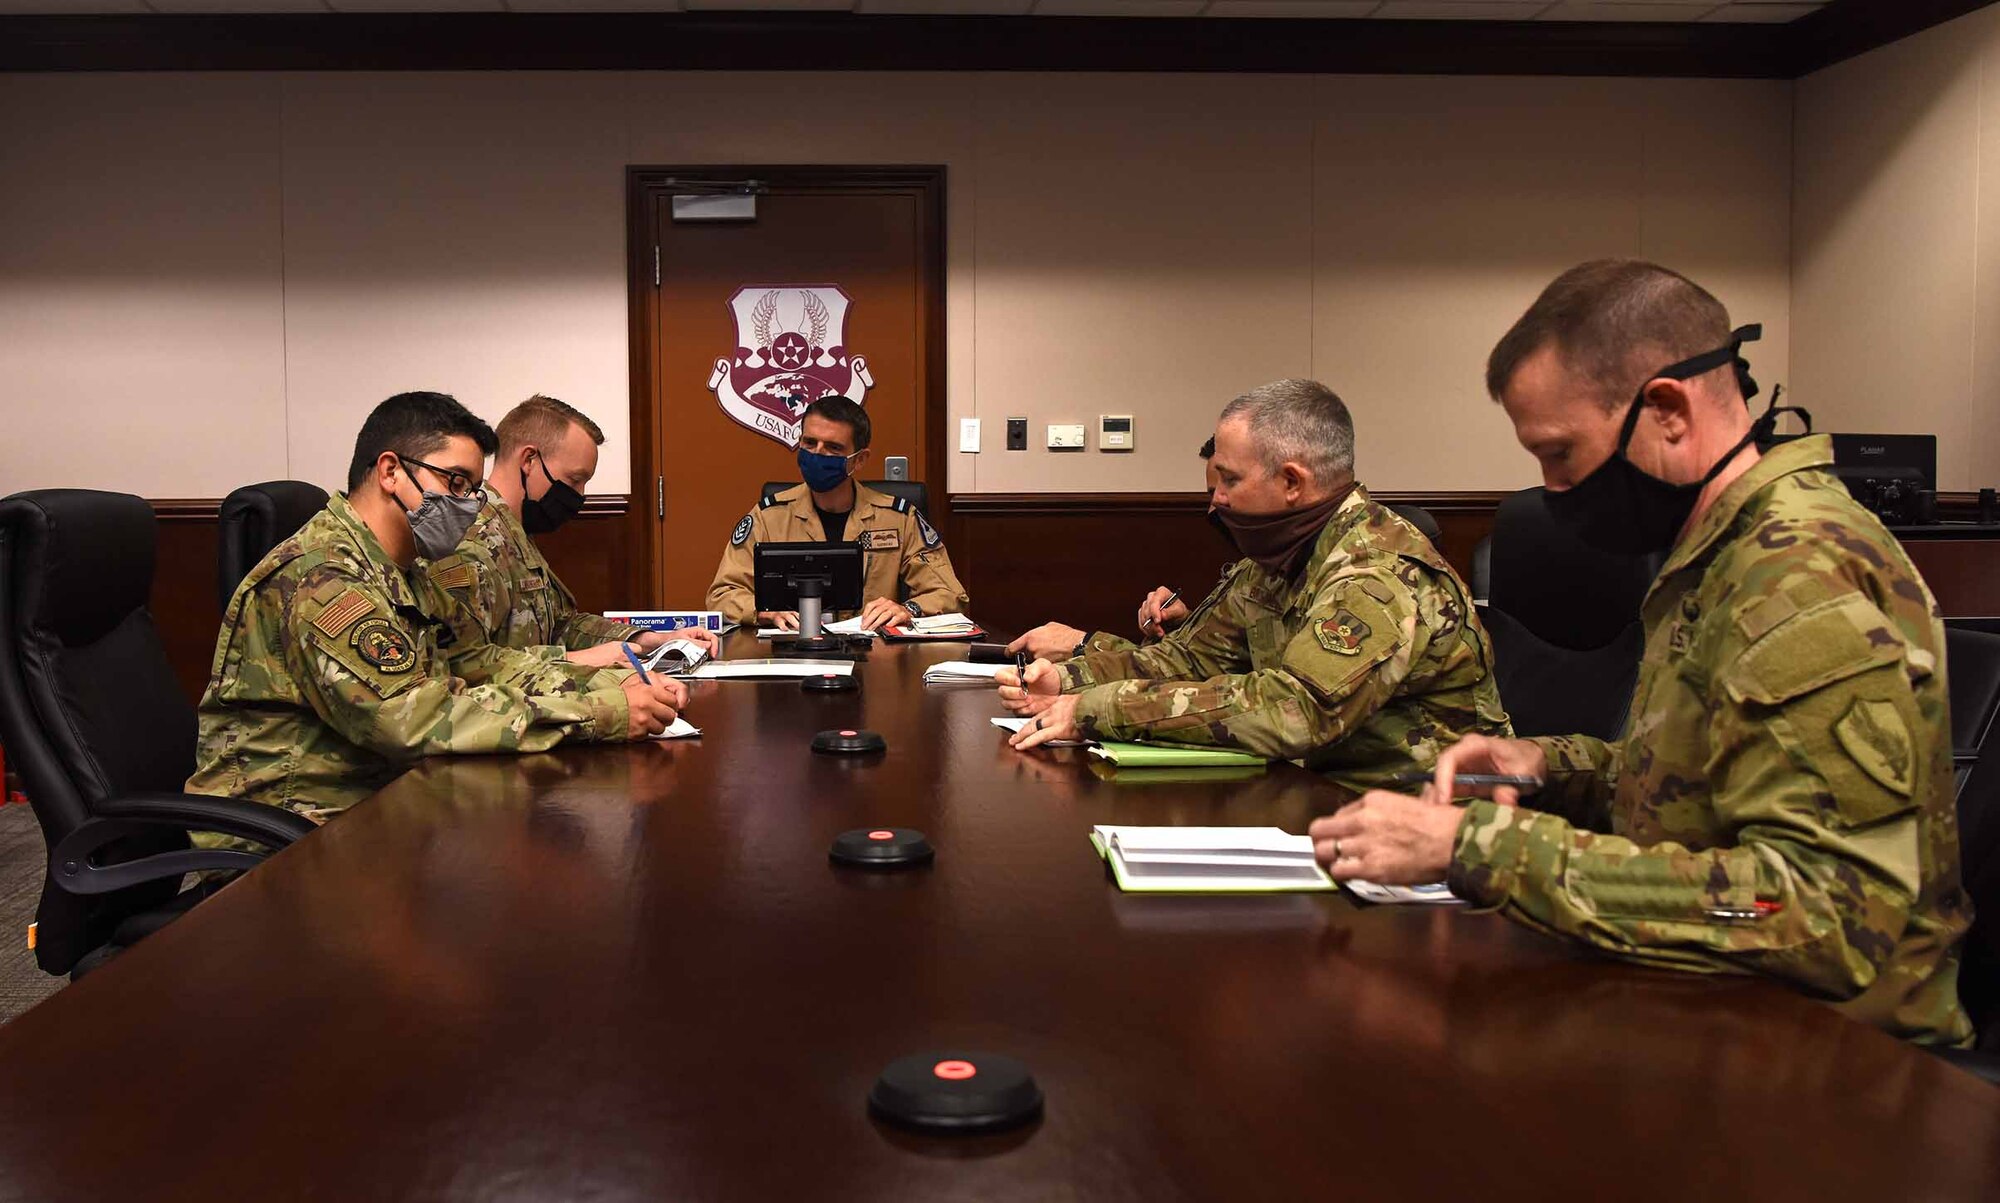 Led by U.S. Air Forces Central Command, the bi-annual exercise focused on improving readiness of air defense assets within the CENTCOM area of responsibility.